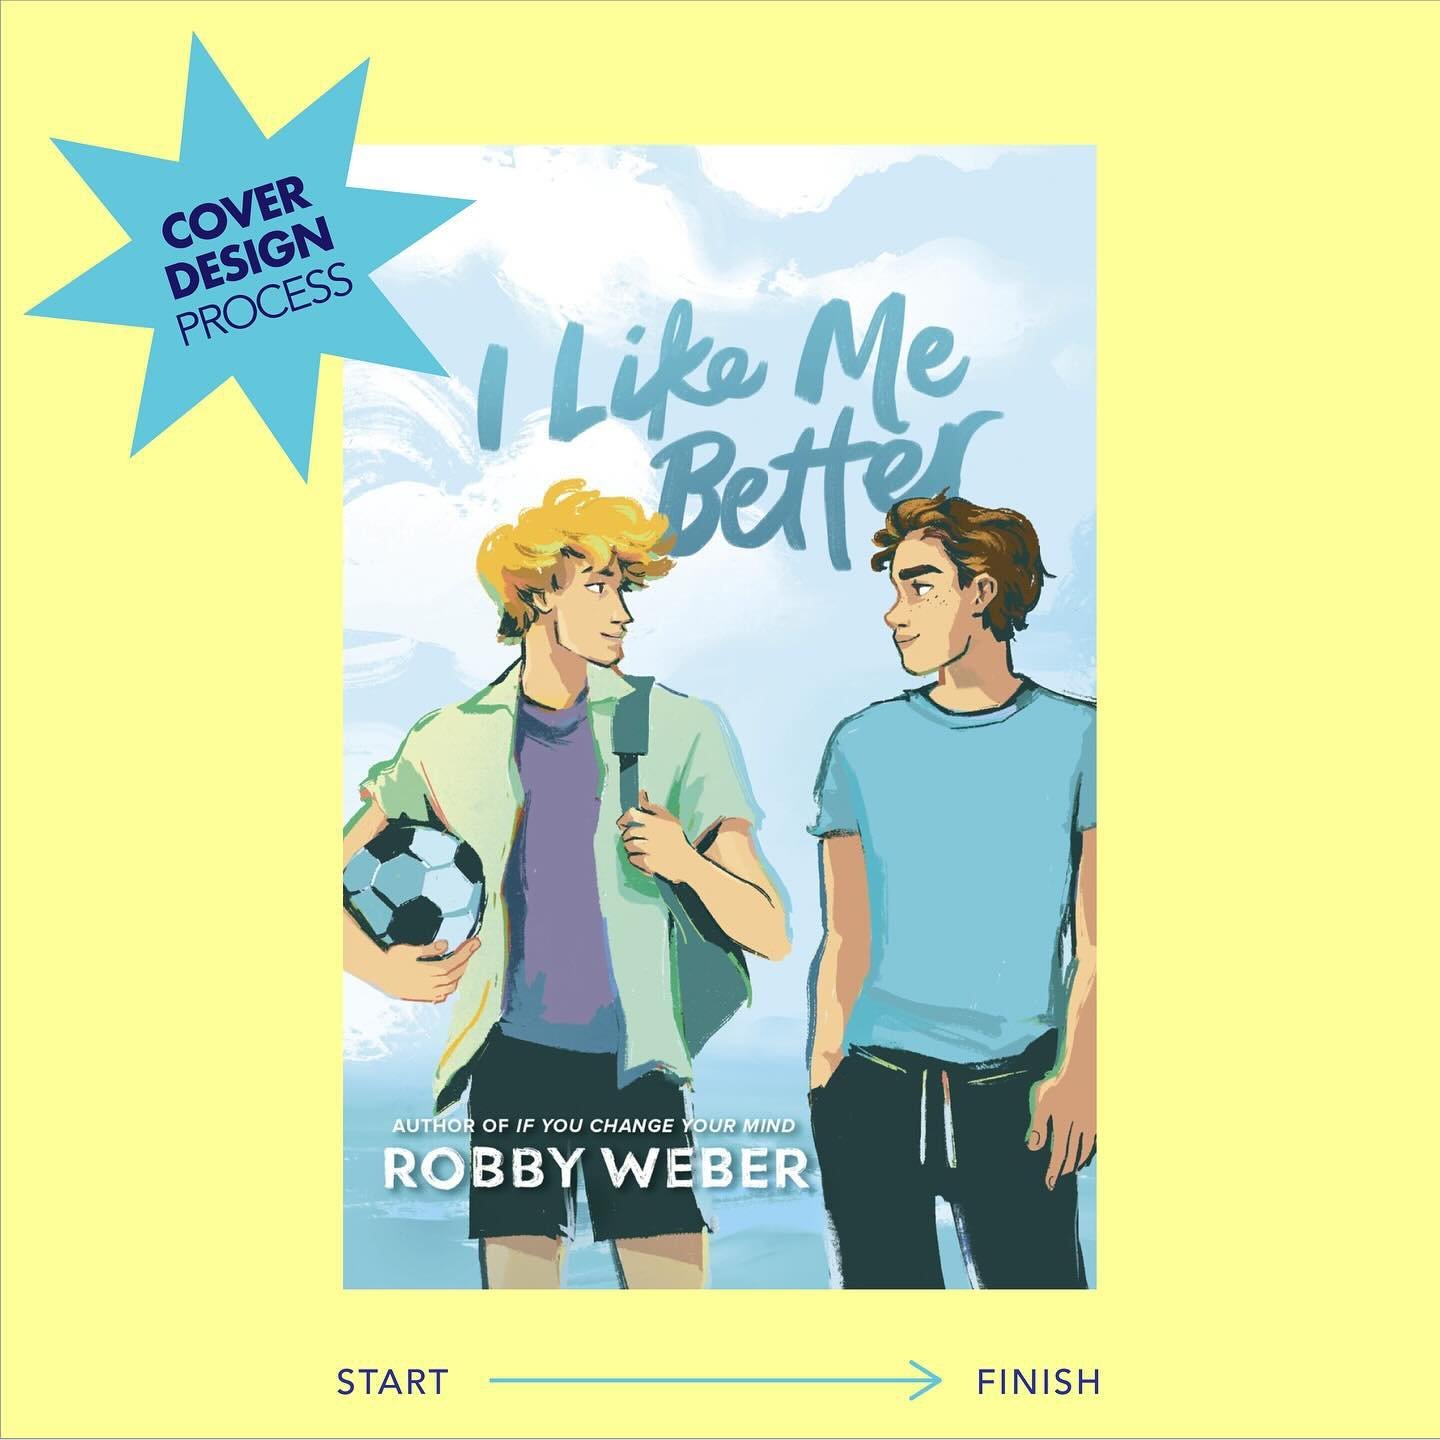 Here&rsquo;s the book cover process for I LIKE ME BETTER by @robbyreads! ⚽️ ☀️

Robby&rsquo;s got some of the sweetest, happiest queer romances on the market right now&mdash;and I was so glad his team came back to do a second book cover with me (chec